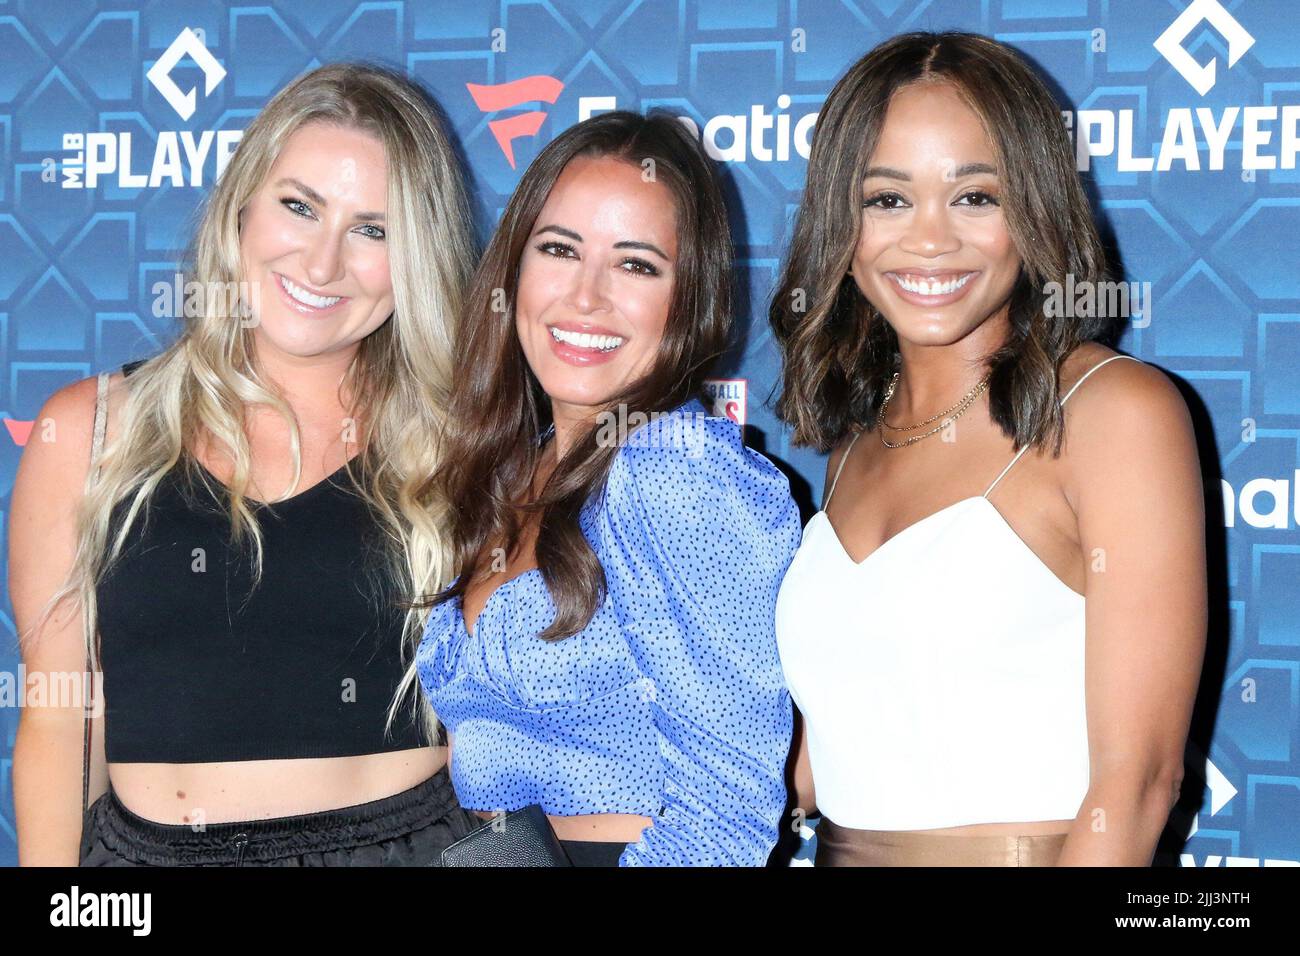 Los Angeles, CA. 18th July, 2022. Katie Conway, Kaylee Hartung, Rachel Lindsay at arrivals for The Players Party Hosted by MLBPA and Fanatics, City Market Social House, Los Angeles, CA July 18, 2022. Credit: Priscilla Grant/Everett Collection/Alamy Live News Stock Photo